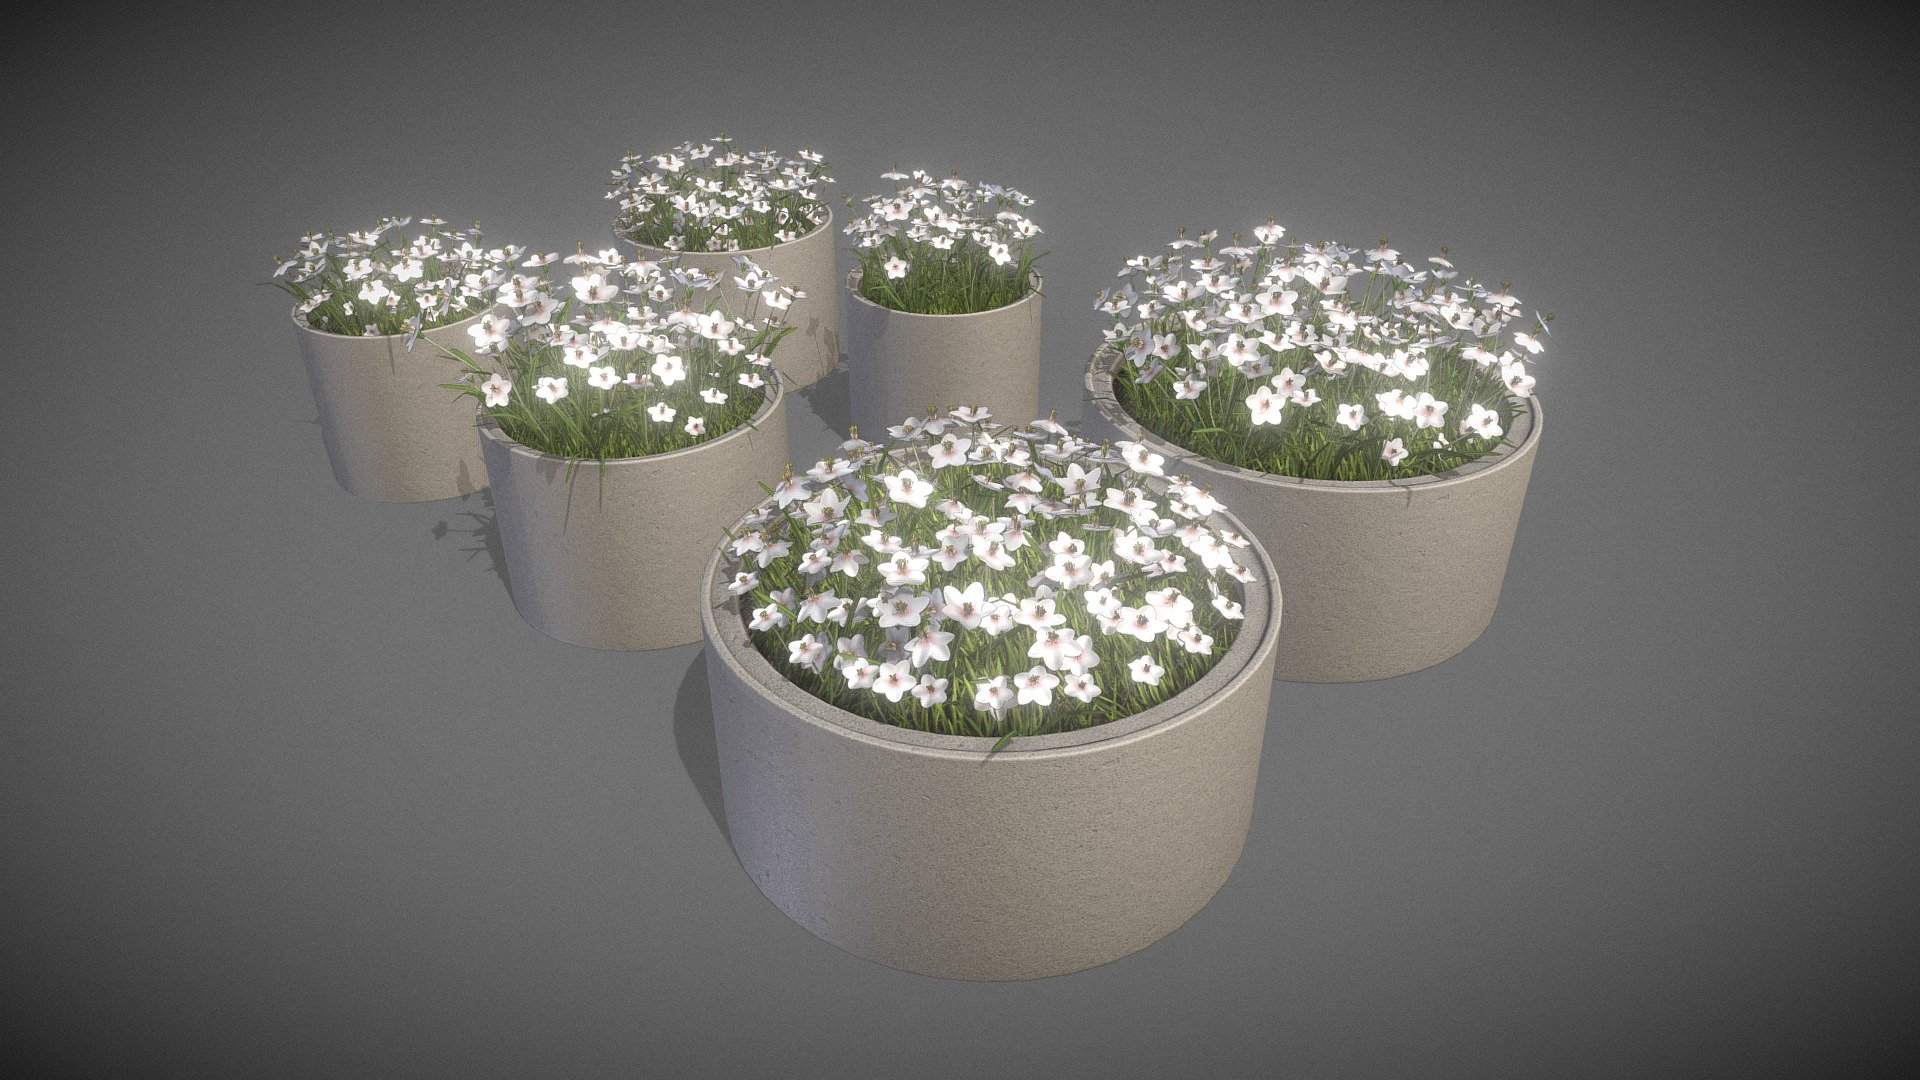 Here are some concrete pipe pots with white flowers.


Parts:



Object Name - Concrete_pot_800mm_White_Flower_1 

Dimensions -  1.014m x 1.001m x 1.110m

Vertices = 4417

Polygons = 2689






Object Name - Concrete_pot_800mm_White_Flower_2 

Dimensions -  0.964m x 1.011m x 0.980m

Vertices = 2946

Polygons = 2094






Object Name - Concrete_pot_1000mm_White_Flower_1 

Dimensions -  1.265m x 1.177m x 1.160m

Vertices = 5576

Polygons = 3279






Object Name - Concrete_pot_1000mm_White_Flower_2 

Dimensions -  1.117m x 1.131m x 1.008m

Vertices = 3904

Polygons = 2628






Object Name - Concrete_pot_1500mm_White_Flower_1 

Dimensions -  1.621m x 1.607m x 1.156m

Vertices = 8889

Polygons = 4838






Object Name - Concrete_pot_1500mm_White_Flower_2 

Dimensions -  1.500m x 1.500m x 1.008m

Edges = 8276

Polygons = 3572



Modeled and textured by 3DHaupt in Blender-2.91 - Concrete Pipe Pots With White Flowers - Buy Royalty Free 3D model by VIS-All-3D (@VIS-All) 3d model